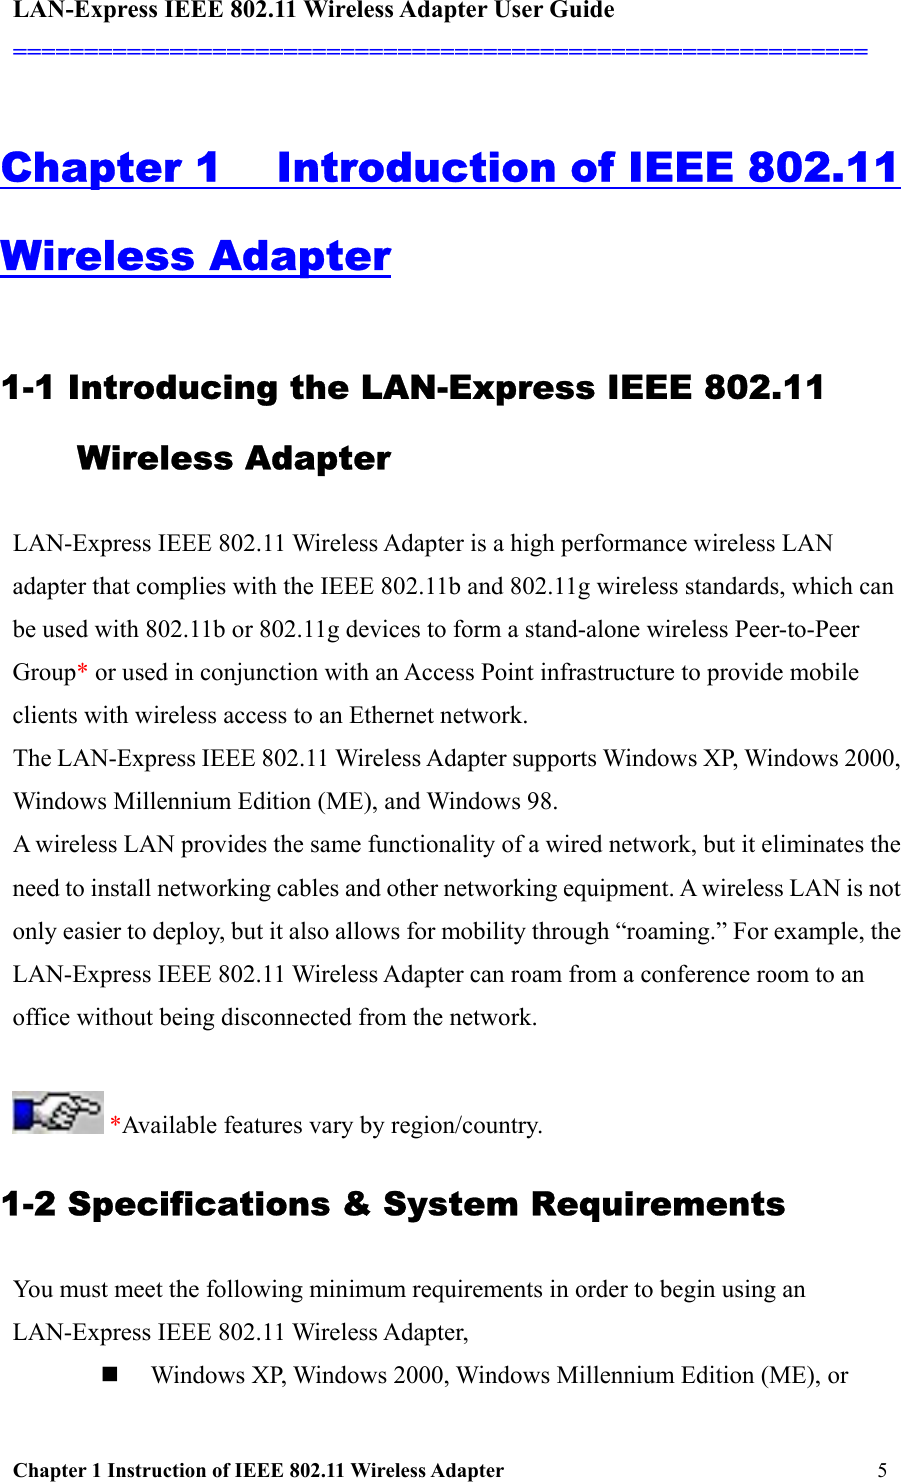 LAN-Express IEEE 802.11 Wireless Adapter User Guide ============================================================  Chapter 1 Instruction of IEEE 802.11 Wireless Adapter 5                                                          Chapter 1    Introduction of IEEE 802.11 Wireless Adapter 1-1 Introducing the LAN-Express IEEE 802.11 Wireless Adapter LAN-Express IEEE 802.11 Wireless Adapter is a high performance wireless LAN adapter that complies with the IEEE 802.11b and 802.11g wireless standards, which can be used with 802.11b or 802.11g devices to form a stand-alone wireless Peer-to-Peer Group* or used in conjunction with an Access Point infrastructure to provide mobile clients with wireless access to an Ethernet network.  The LAN-Express IEEE 802.11 Wireless Adapter supports Windows XP, Windows 2000, Windows Millennium Edition (ME), and Windows 98.  A wireless LAN provides the same functionality of a wired network, but it eliminates the need to install networking cables and other networking equipment. A wireless LAN is not only easier to deploy, but it also allows for mobility through “roaming.” For example, the LAN-Express IEEE 802.11 Wireless Adapter can roam from a conference room to an office without being disconnected from the network.   *Available features vary by region/country. 1-2 Specifications &amp; System Requirements You must meet the following minimum requirements in order to begin using an LAN-Express IEEE 802.11 Wireless Adapter,    Windows XP, Windows 2000, Windows Millennium Edition (ME), or 